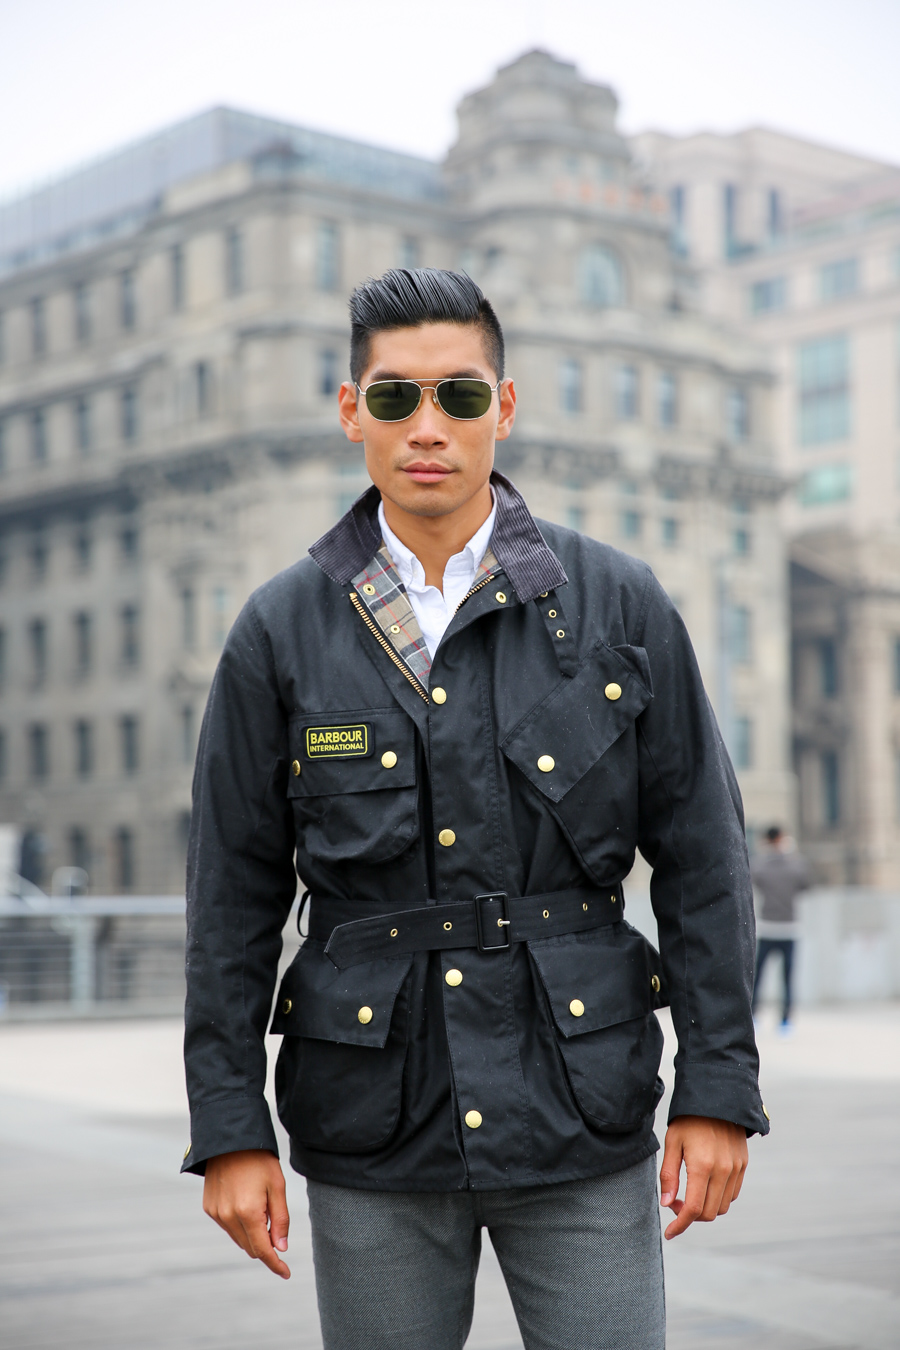 Barbour Shanghai Style, Leo Chan, Levitate Style